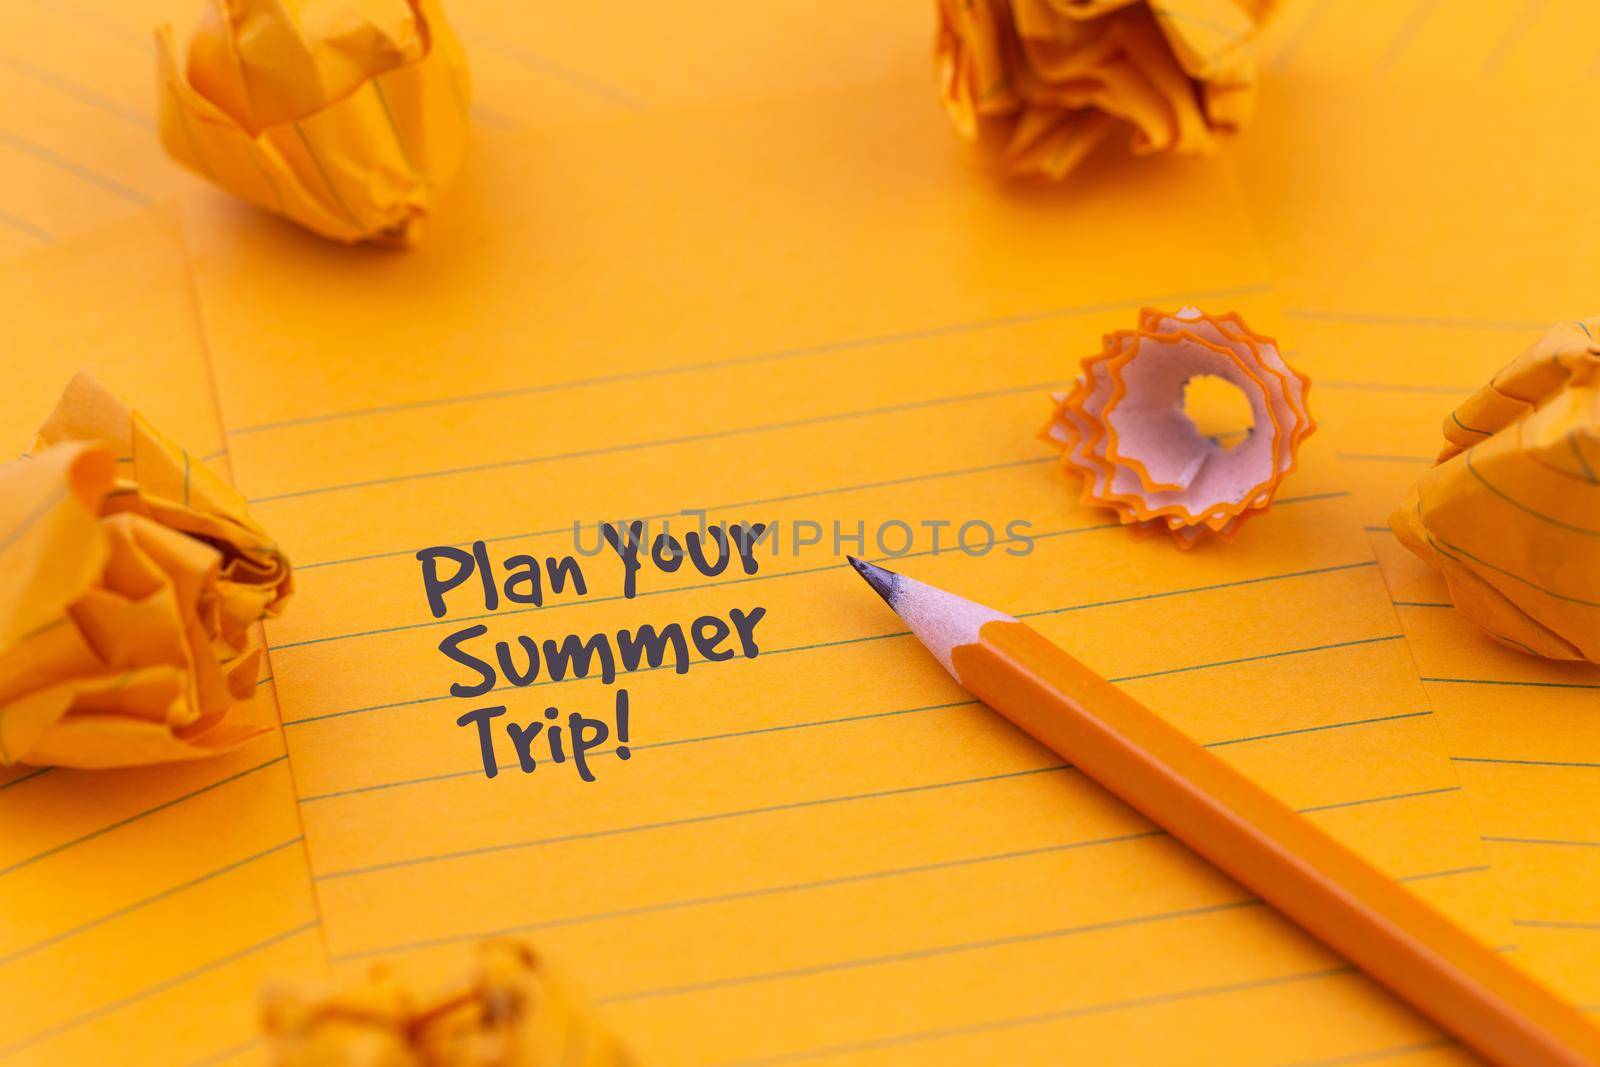 Concept Hello summer or planning a summer trip. Orange sheets of paper, pencil and other stationery objects.